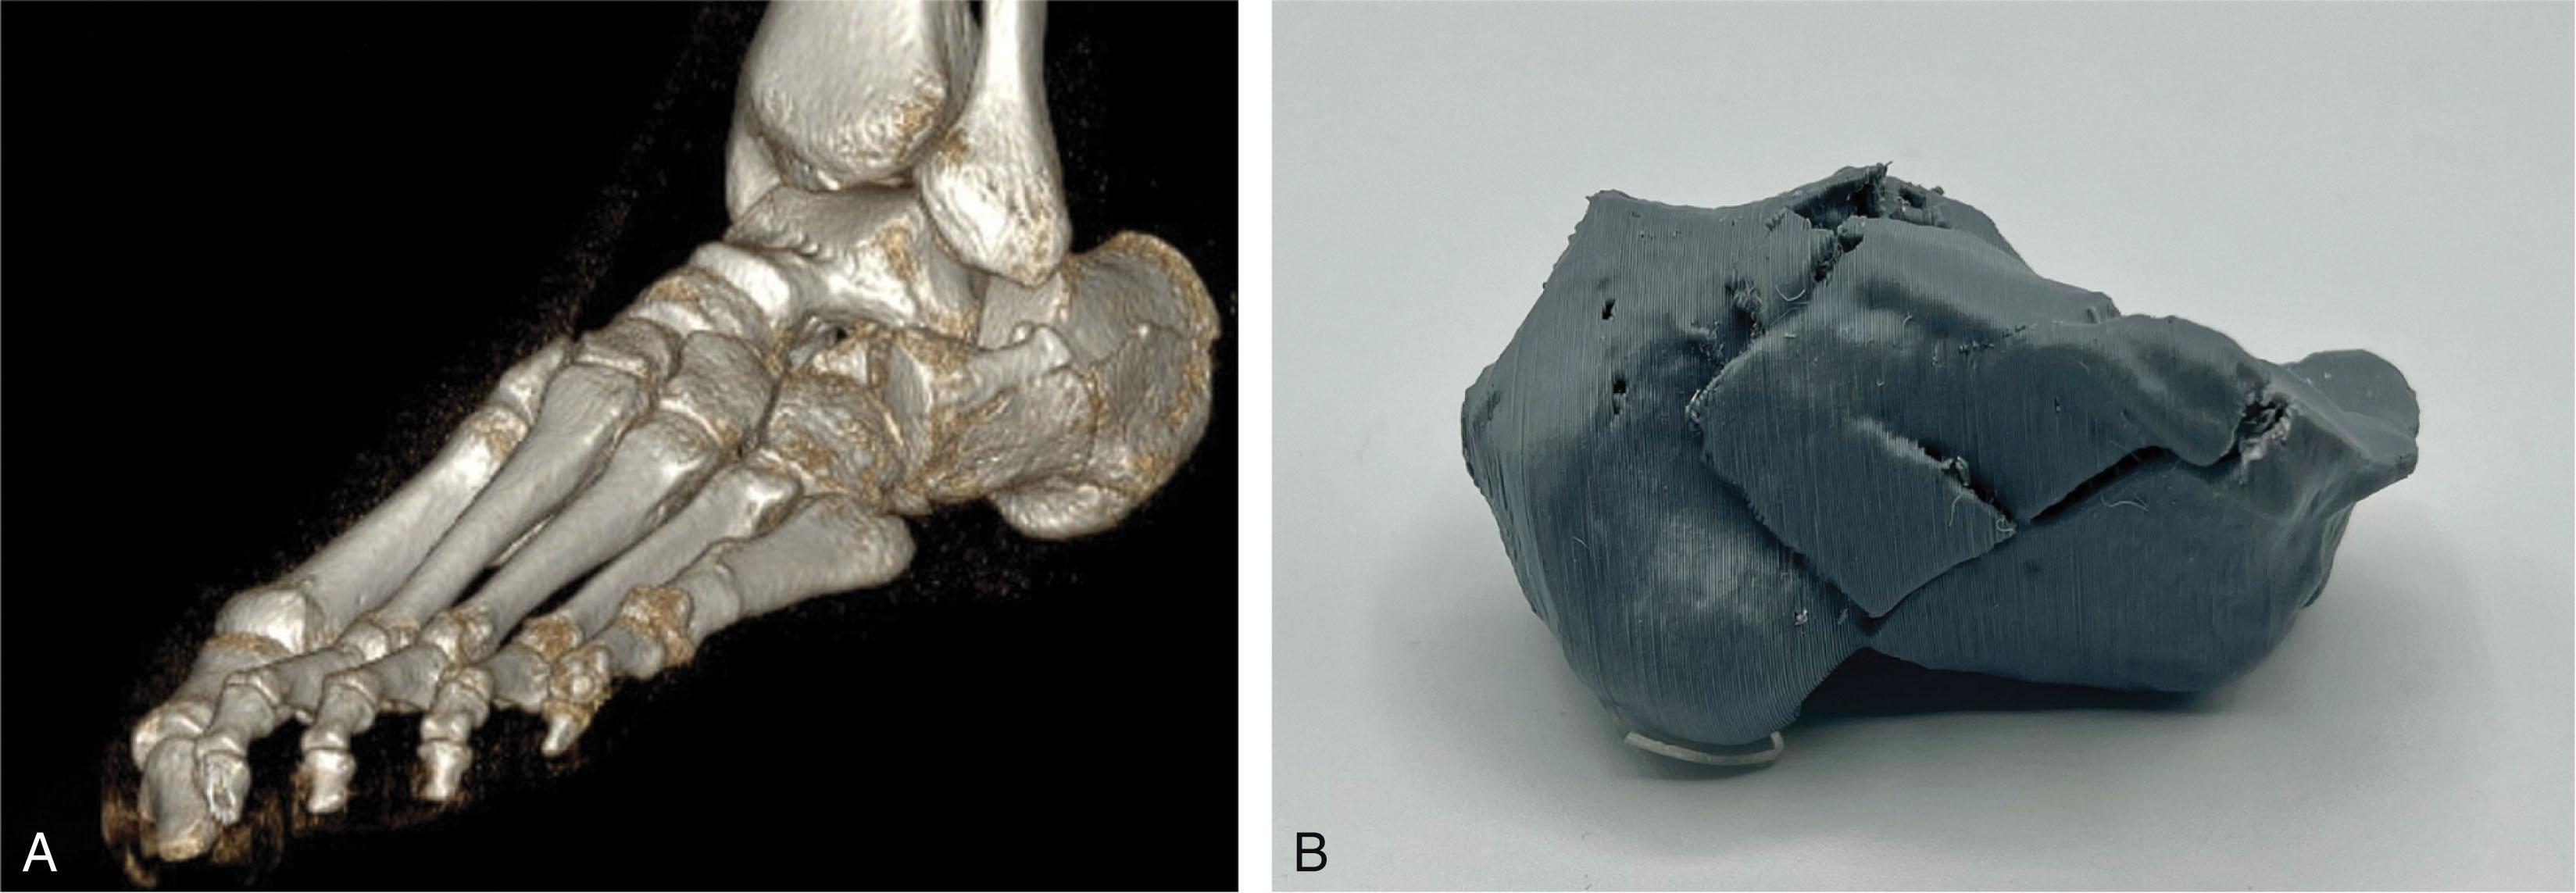 Fig. 45-14, Data from computed tomography scans can be used to create three-dimensional graphical representation (A) or additive printed models (B) of calcaneus fractures, which may help the surgeon visualize fracture patterns, particularly when using minimally invasive reduction and fixation techniques.